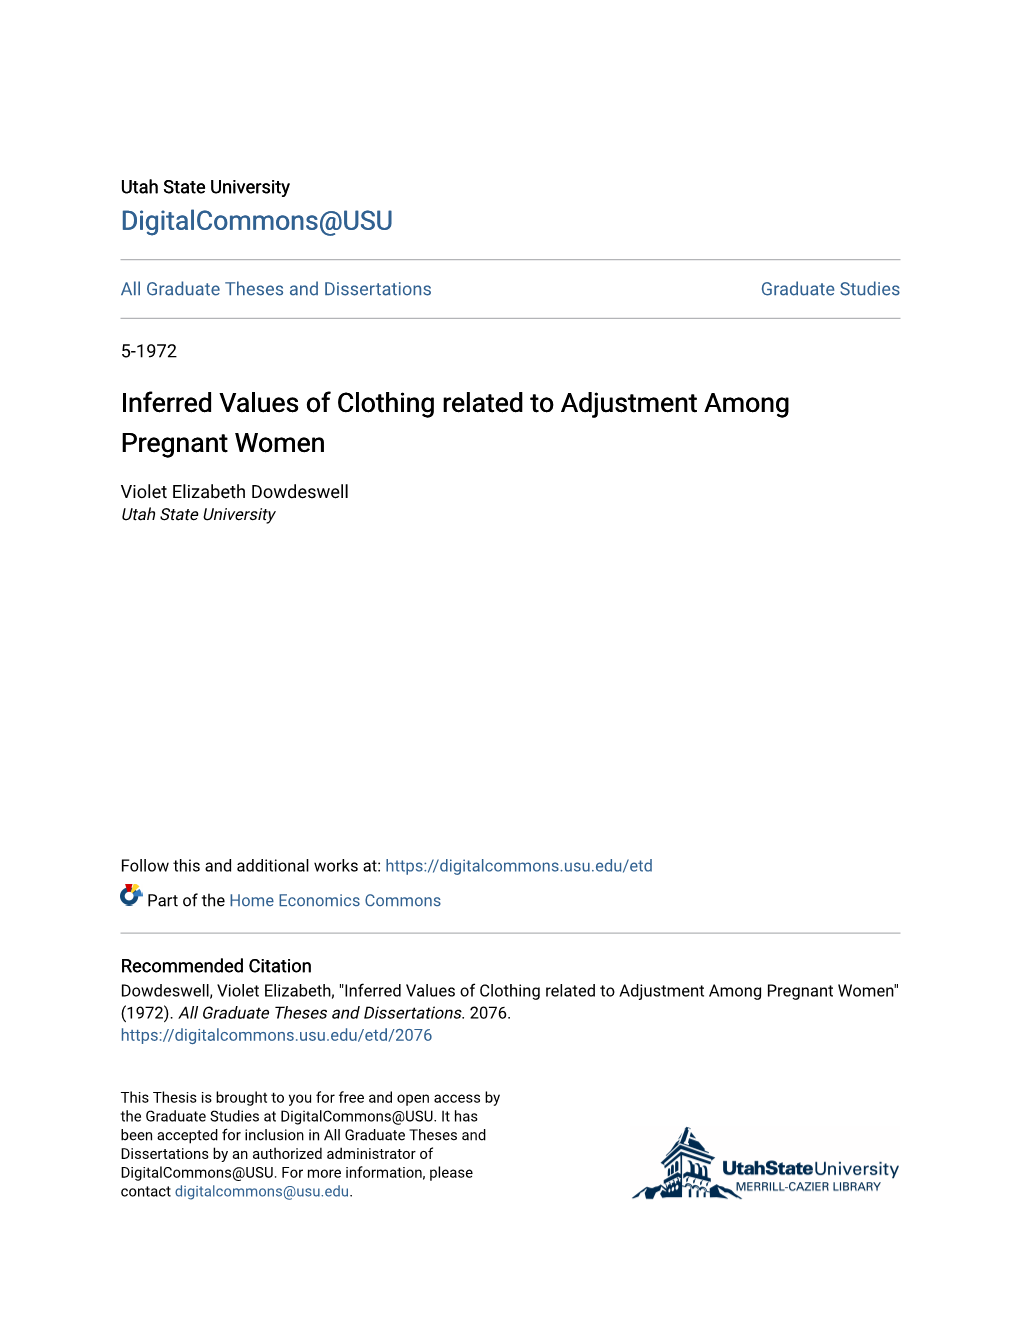 Inferred Values of Clothing Related to Adjustment Among Pregnant Women